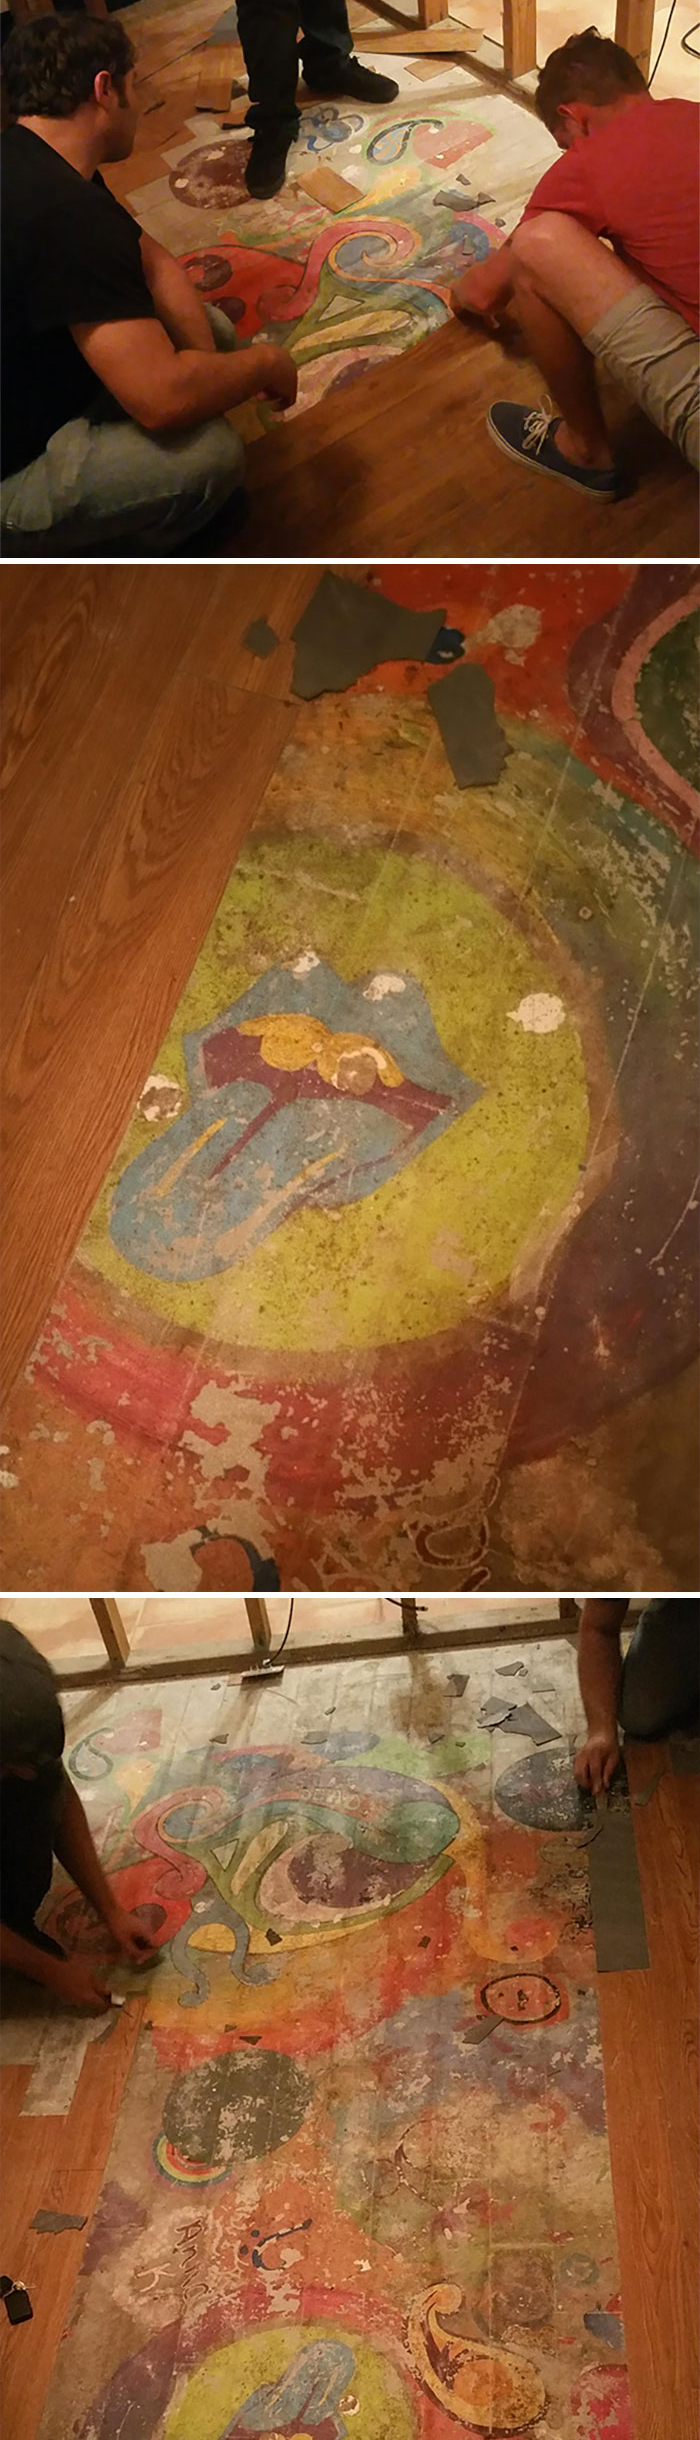 lost hippie mural discovered in a flooded house